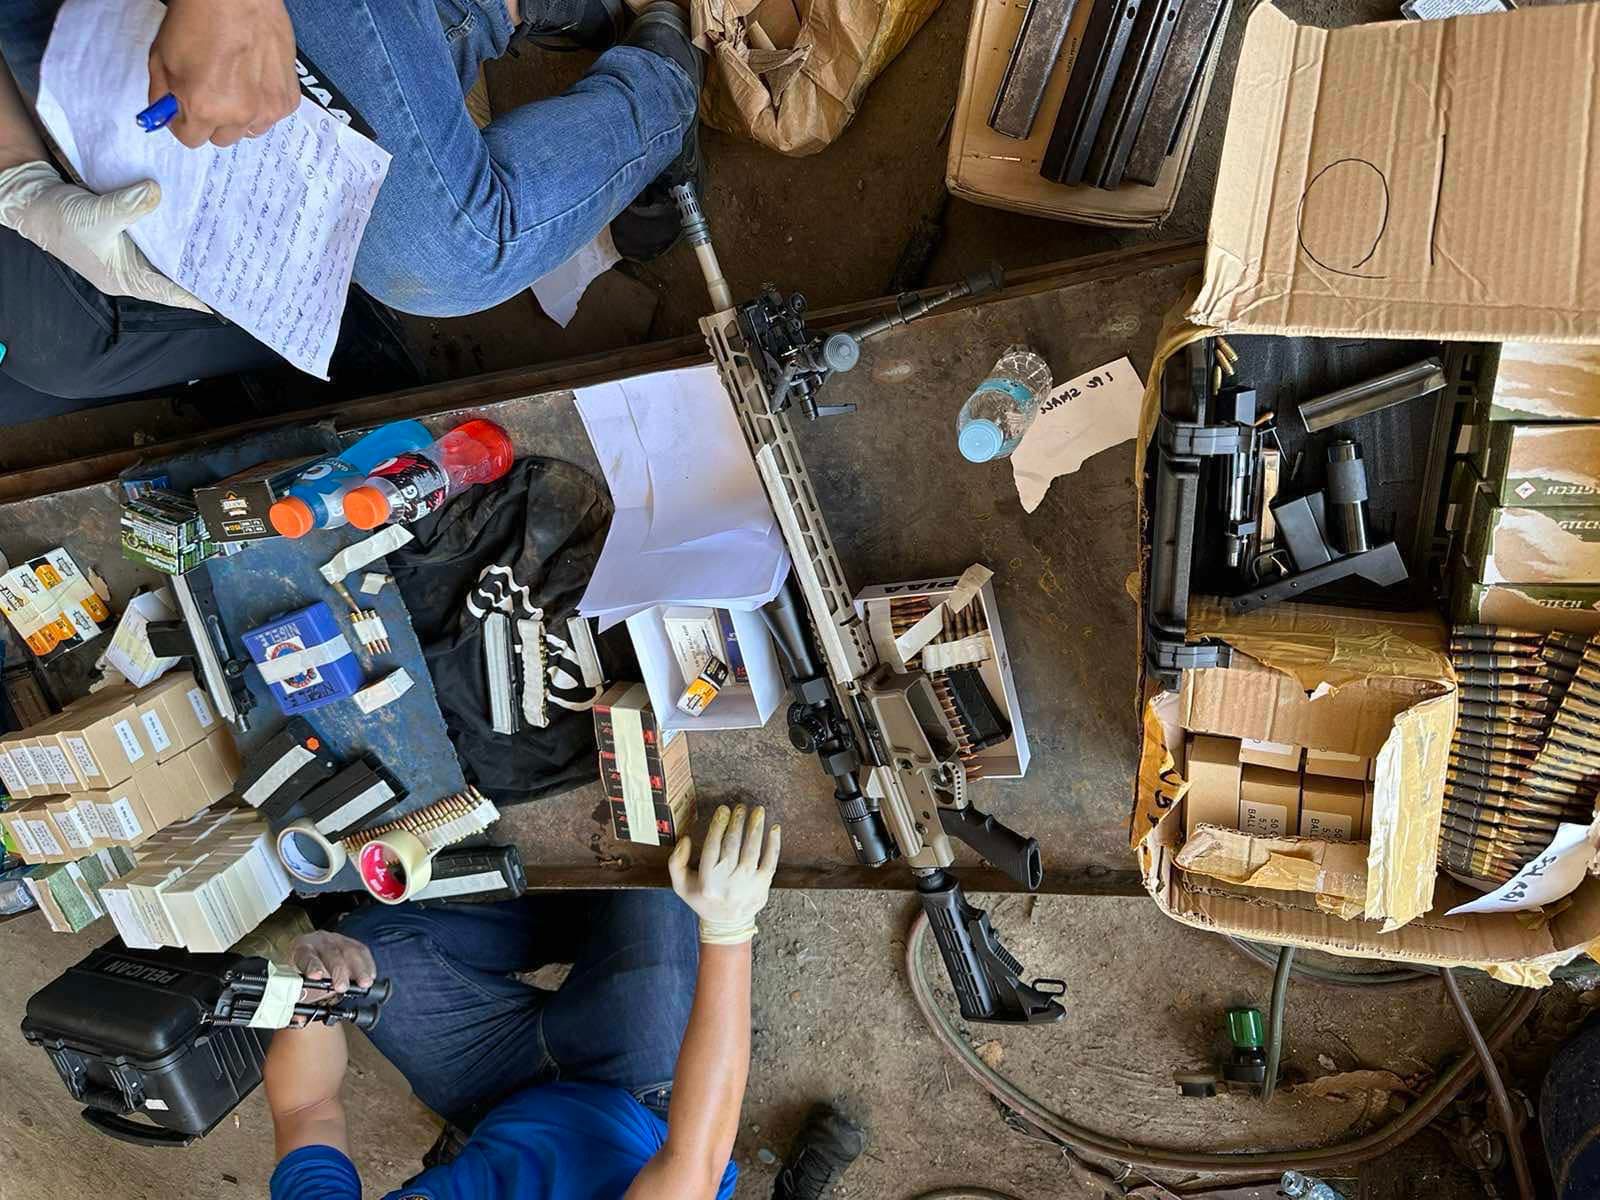 Police seize weapons, cash from Teves sibling’s property